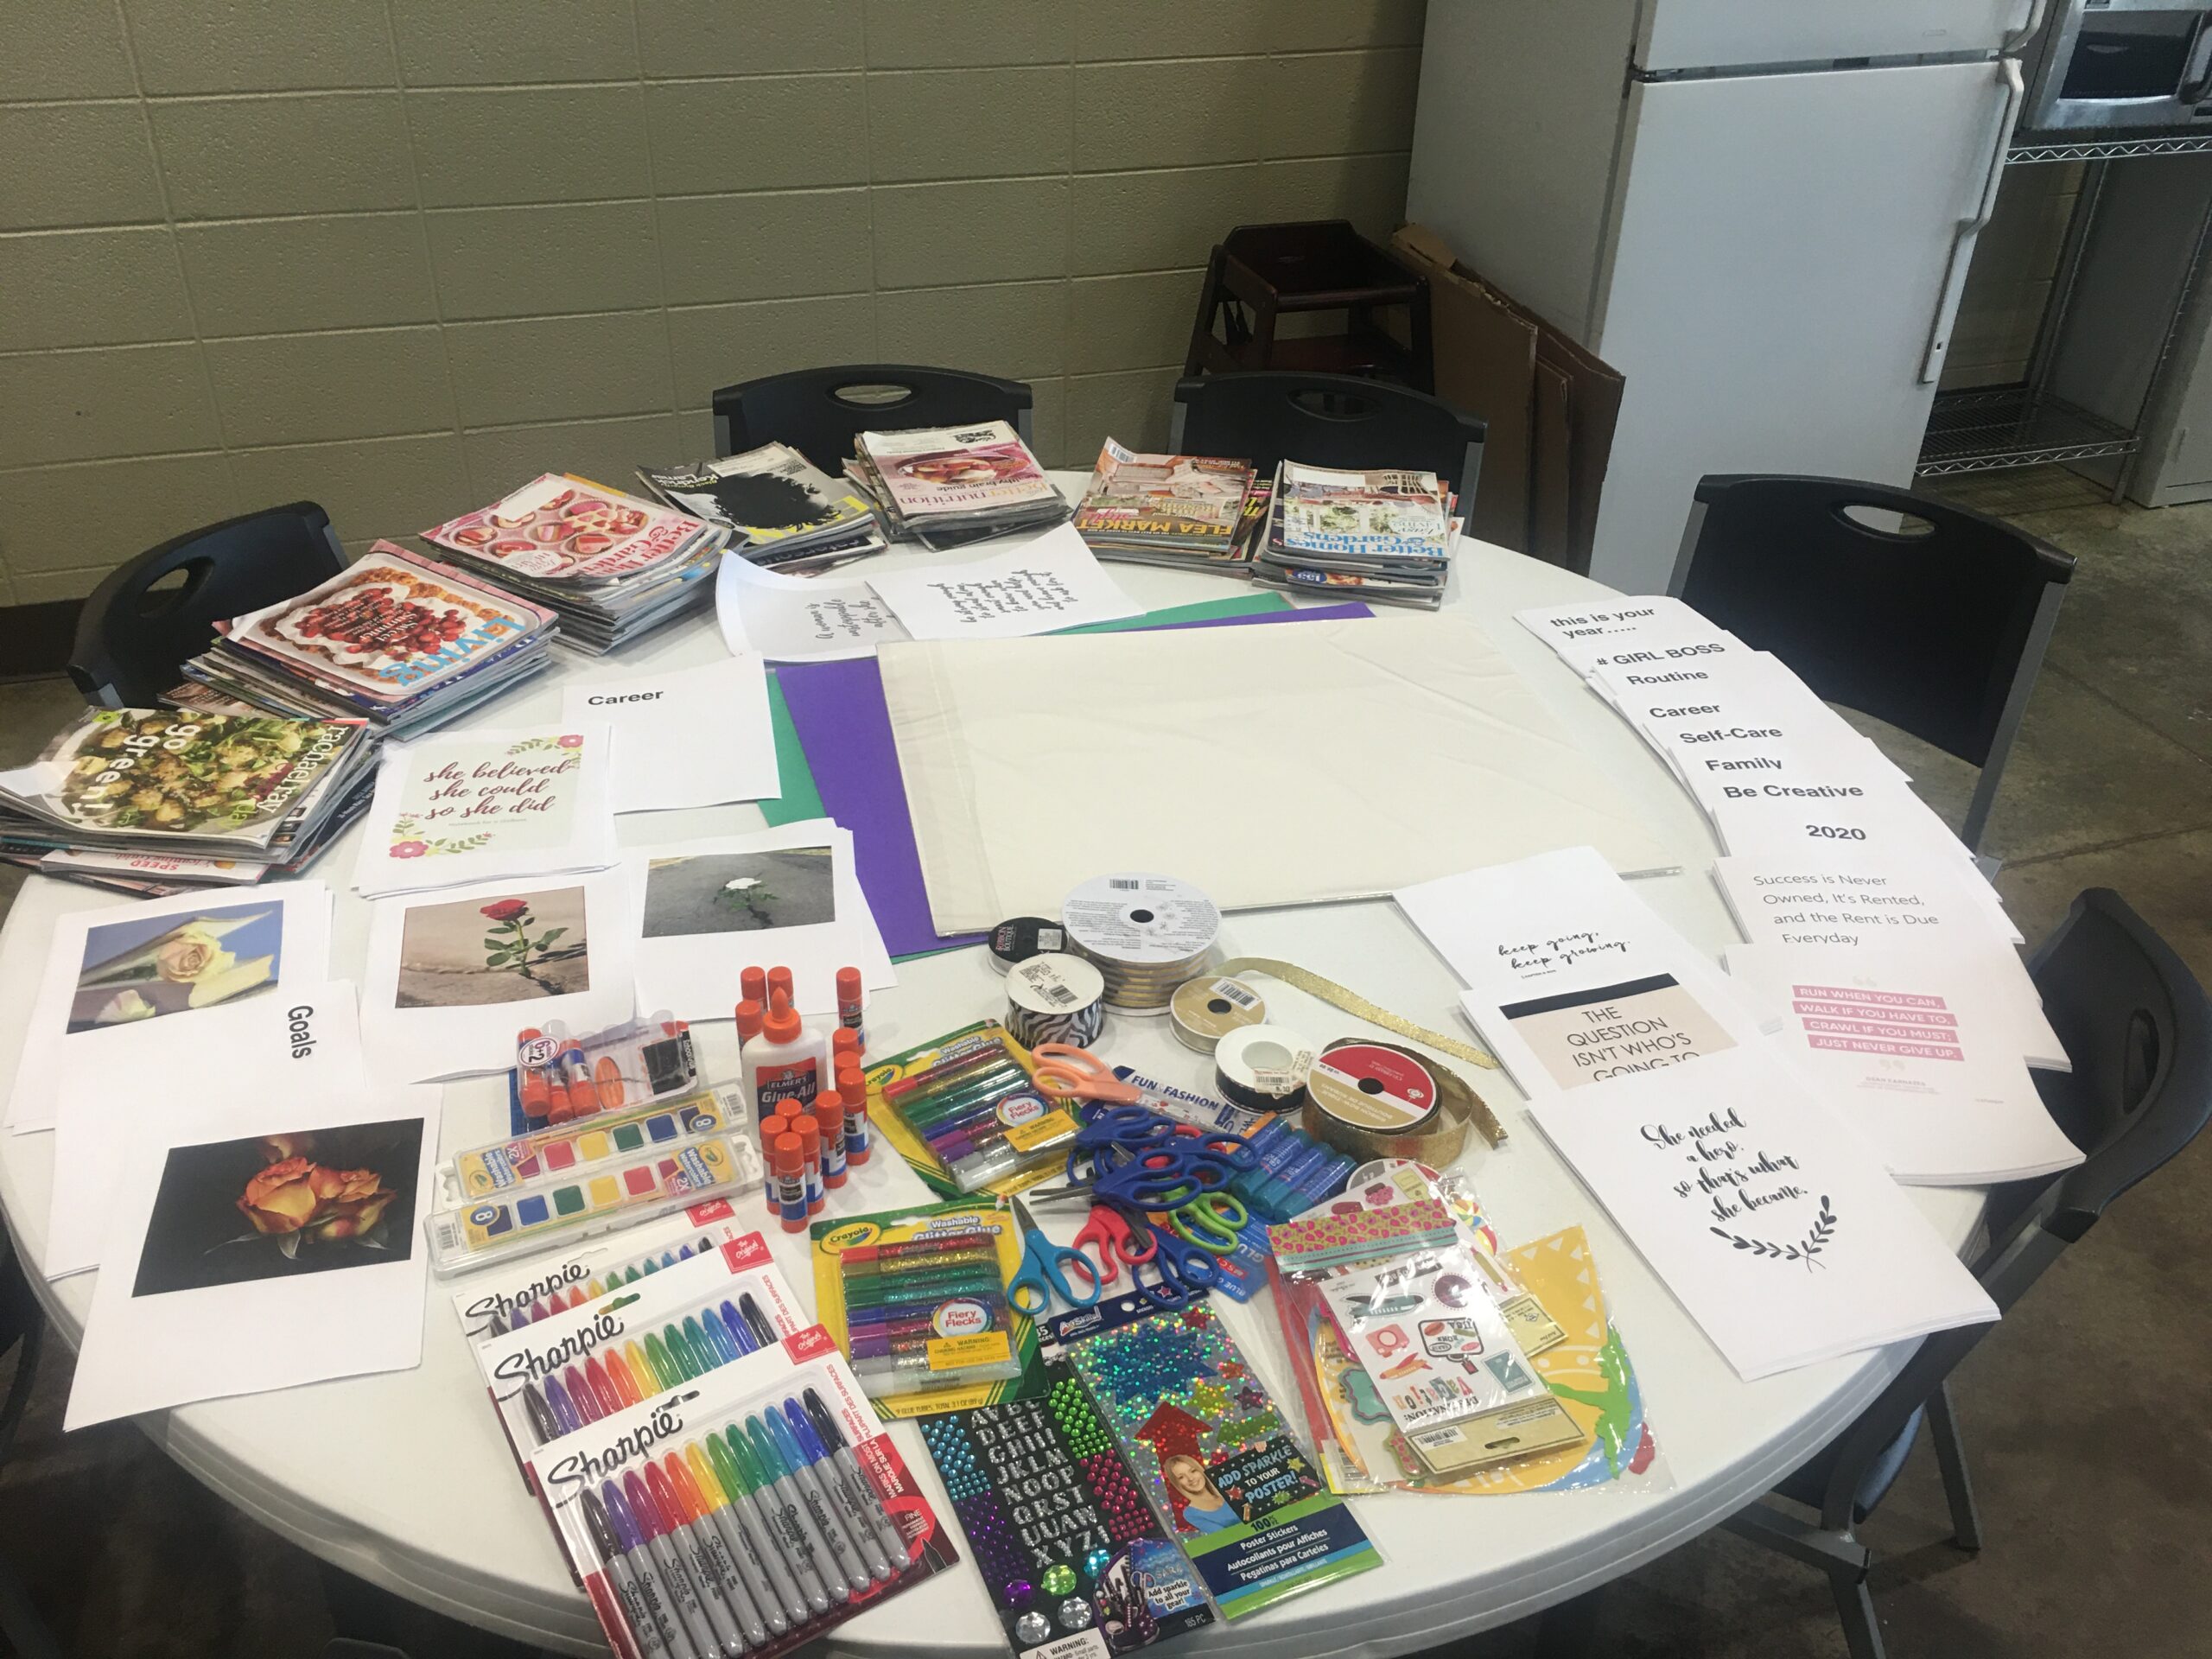 A picture of a table with a variety of arts and crafts supplies to make vision boards.